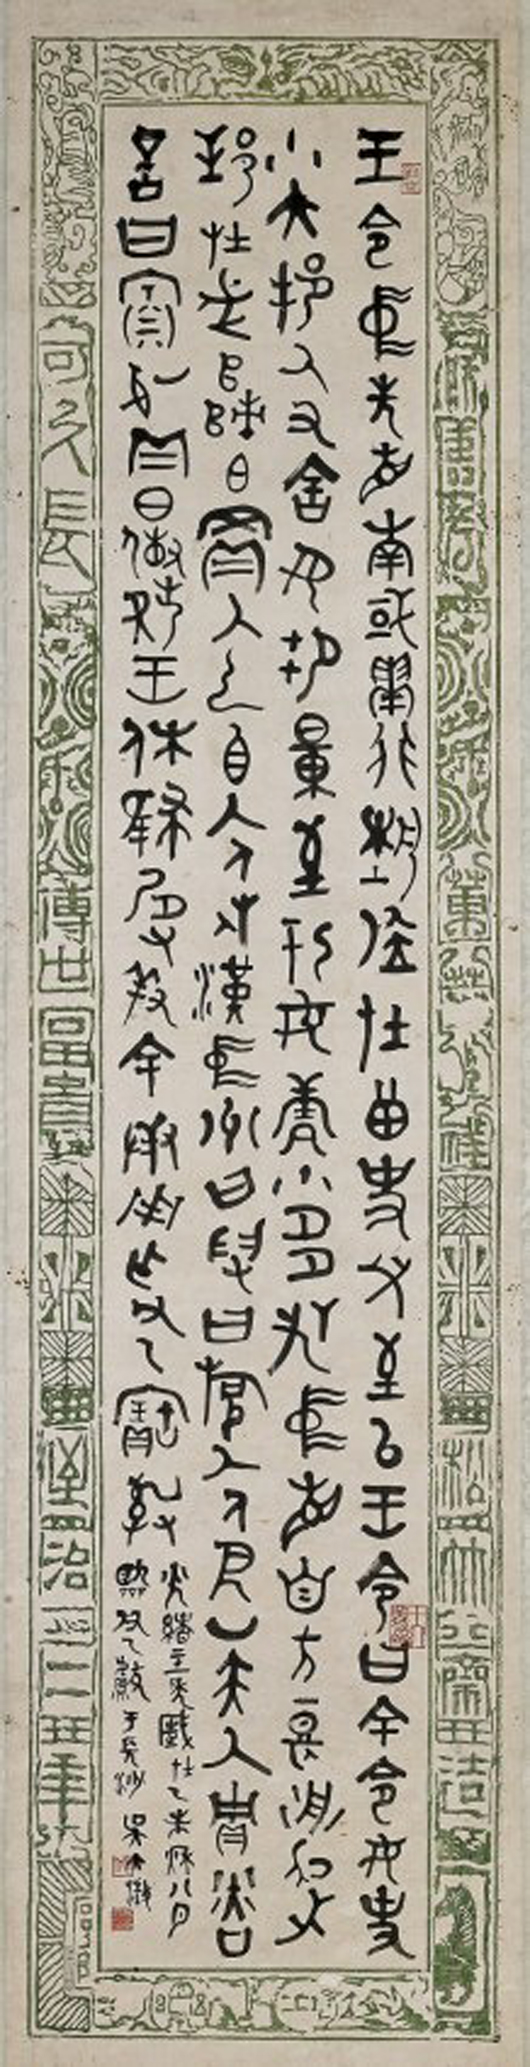 Chinese ink on paper calligraphy in Jin script by Wu DaCheng (1835-1902). Estimate: $60,000-$90,000. I.M. Chait Gallery / Auctioneers image.